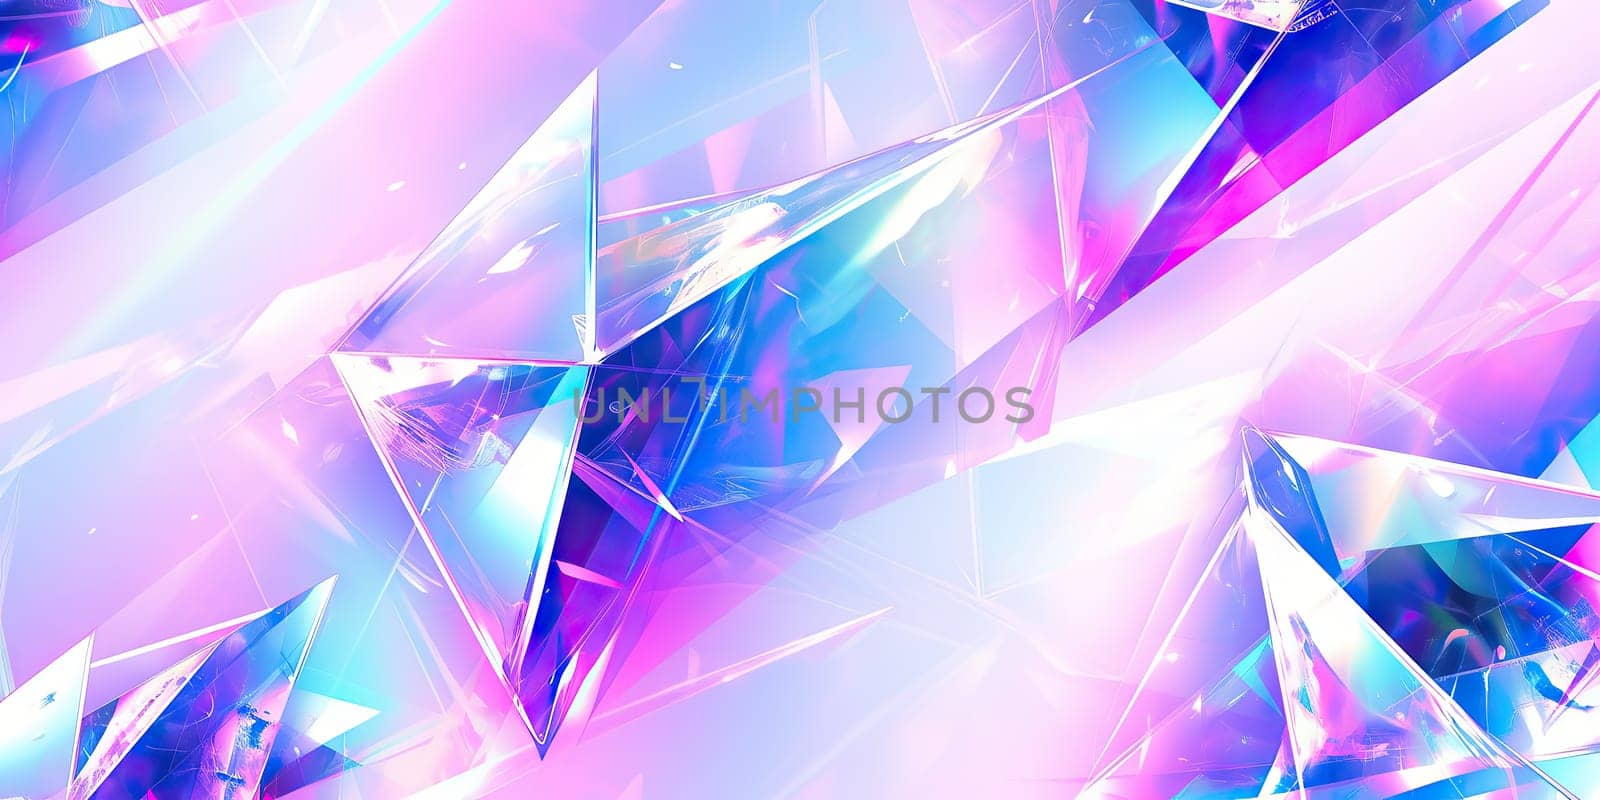 Holographic background with glass shards. Rainbow reflexes in pink and purple color. Abstract trendy pattern. Texture with magical effect. by Artsiom